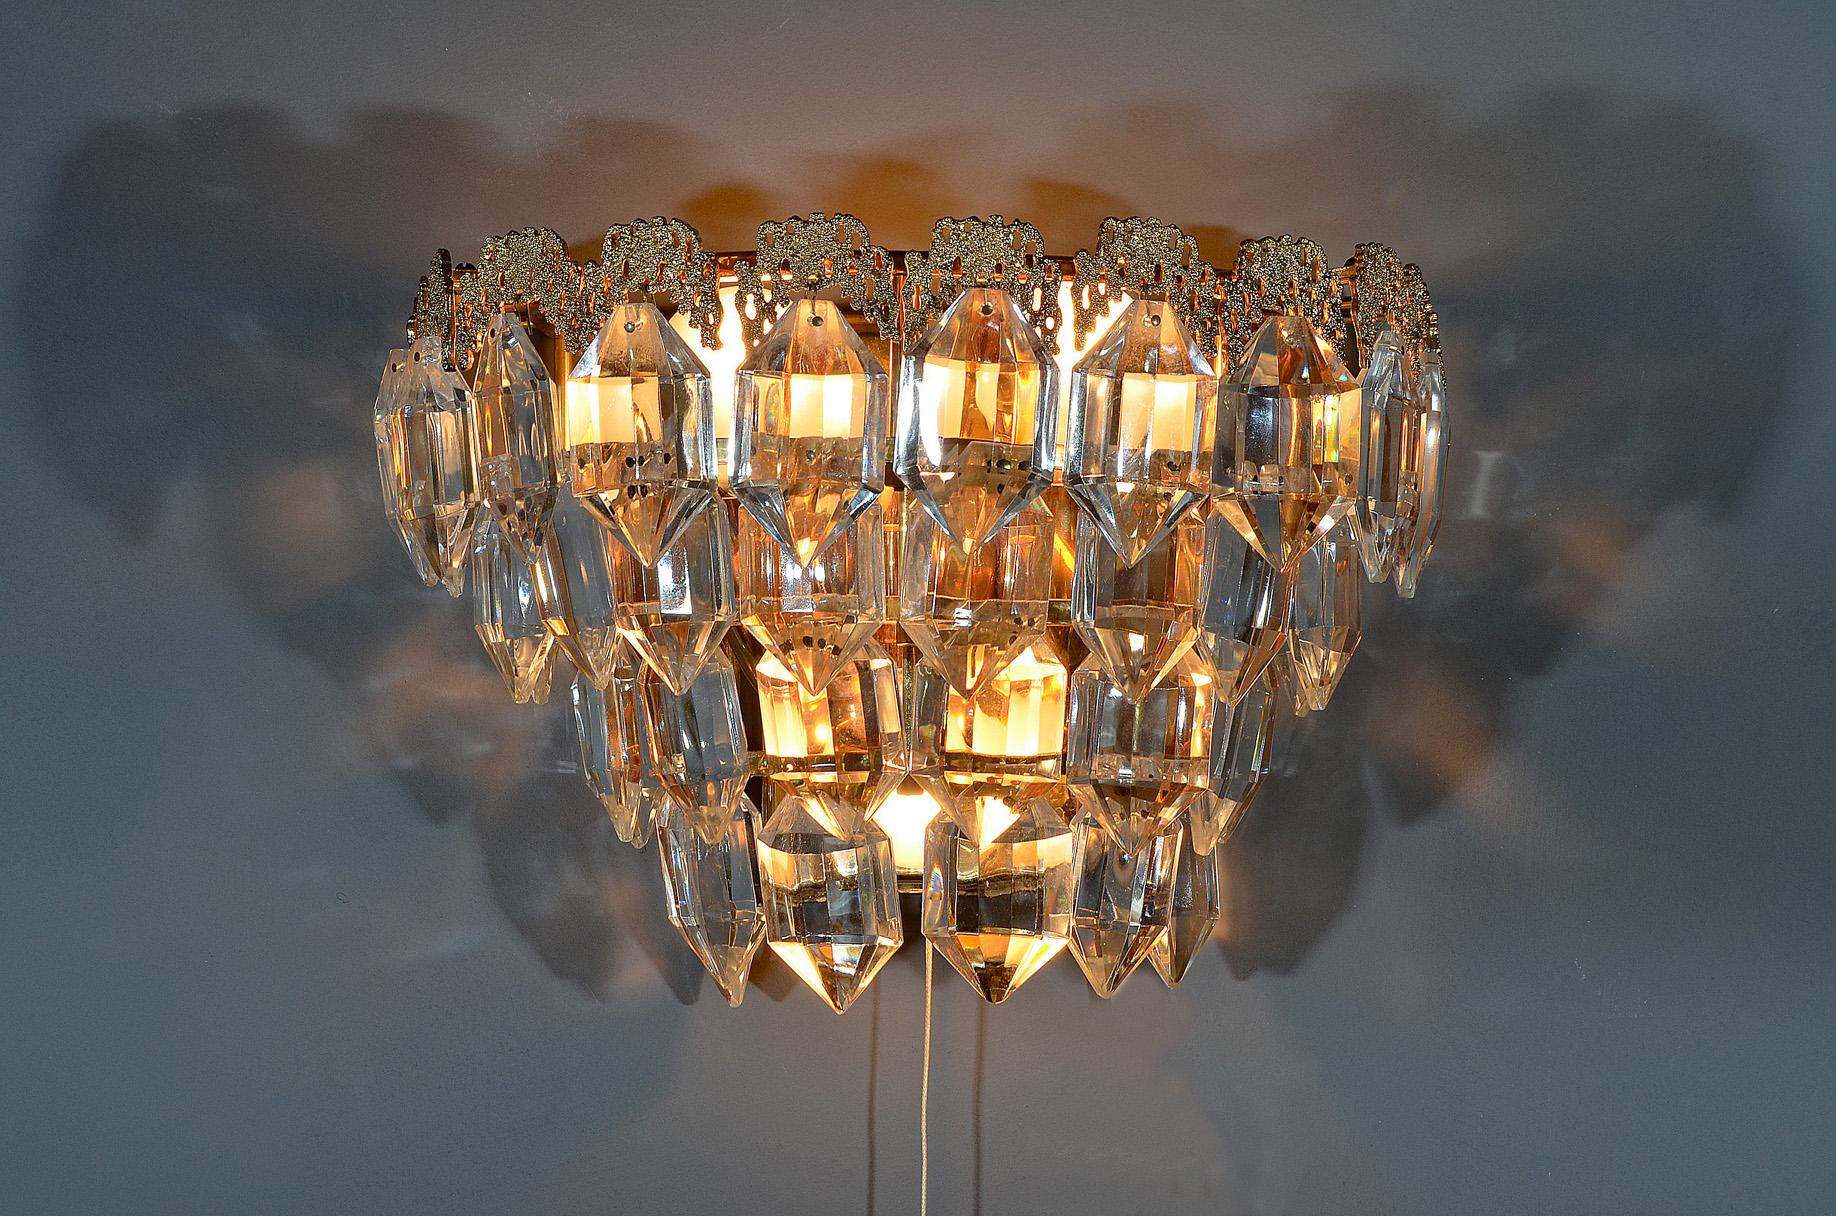 Austrian Pair of Sconces from Bakalowits, Austria 1960s, Gilt Brass and Faceted Glass